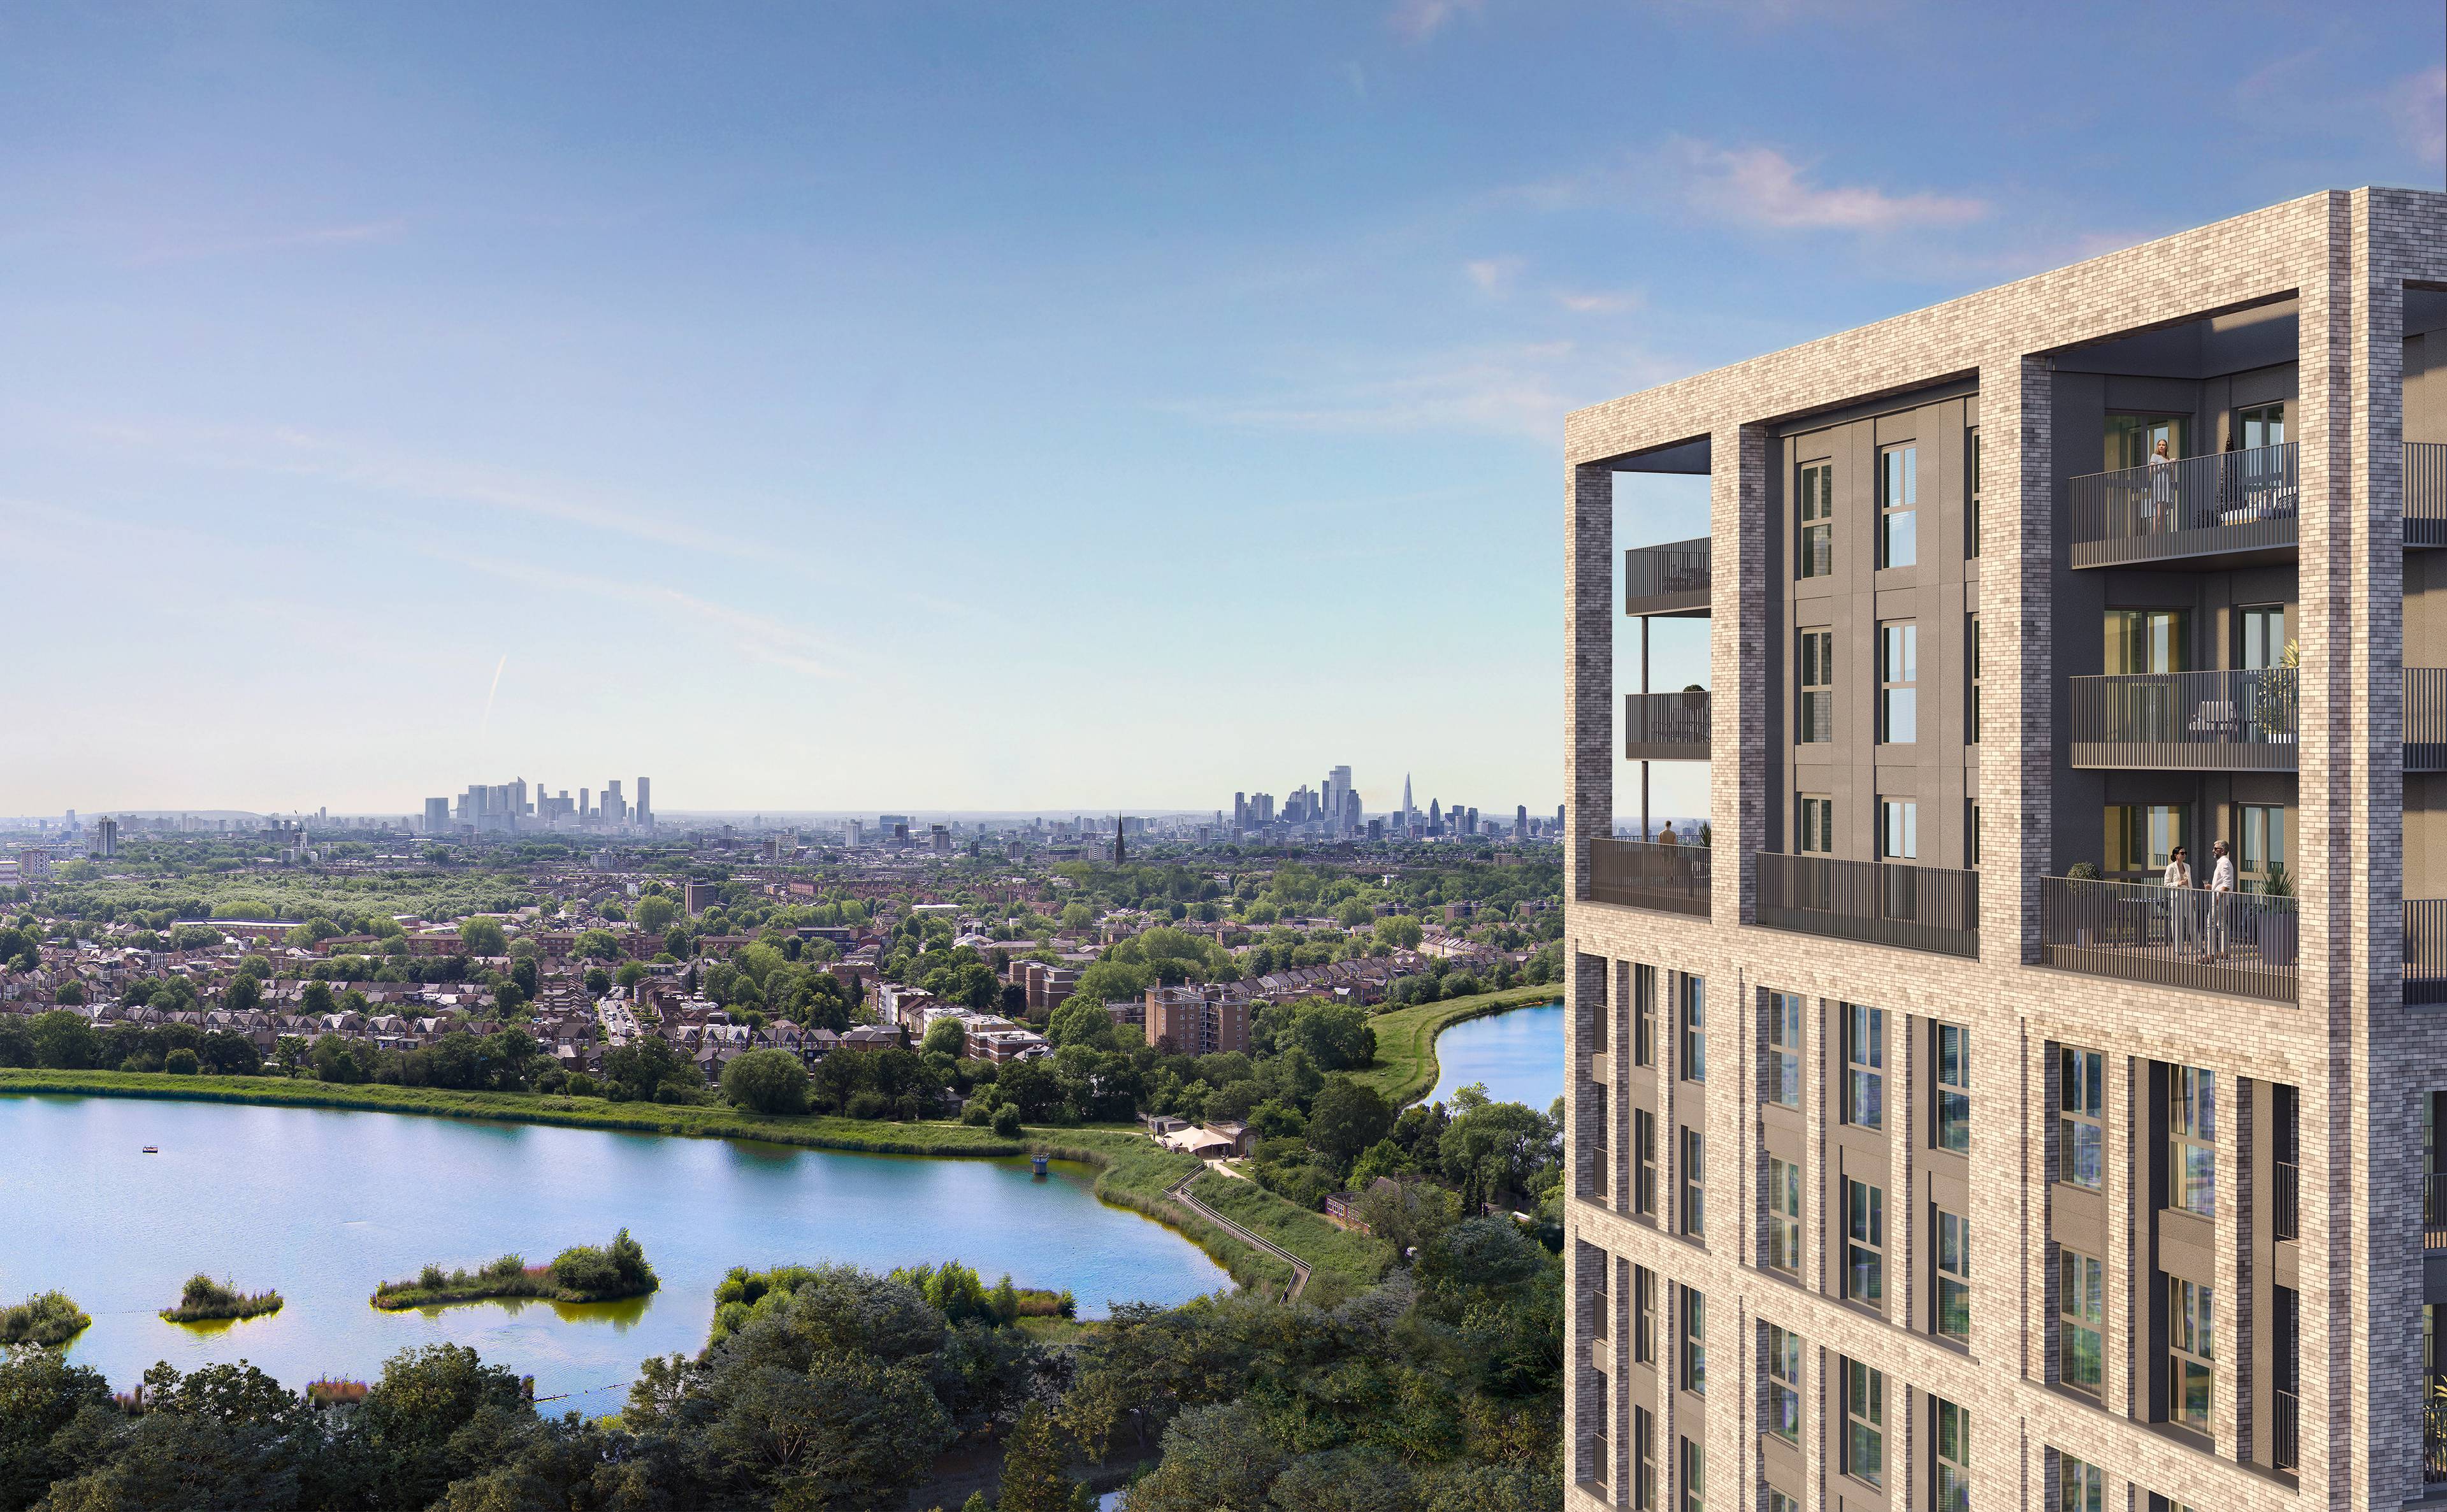 Hidden Oasis, 10 minutes from Central London -  Luxury 2-Bedroom Apartment in a Stunning New Development Surrounded by Nature - Ninth Floor - Reservoirs and Alexandra Palace Views